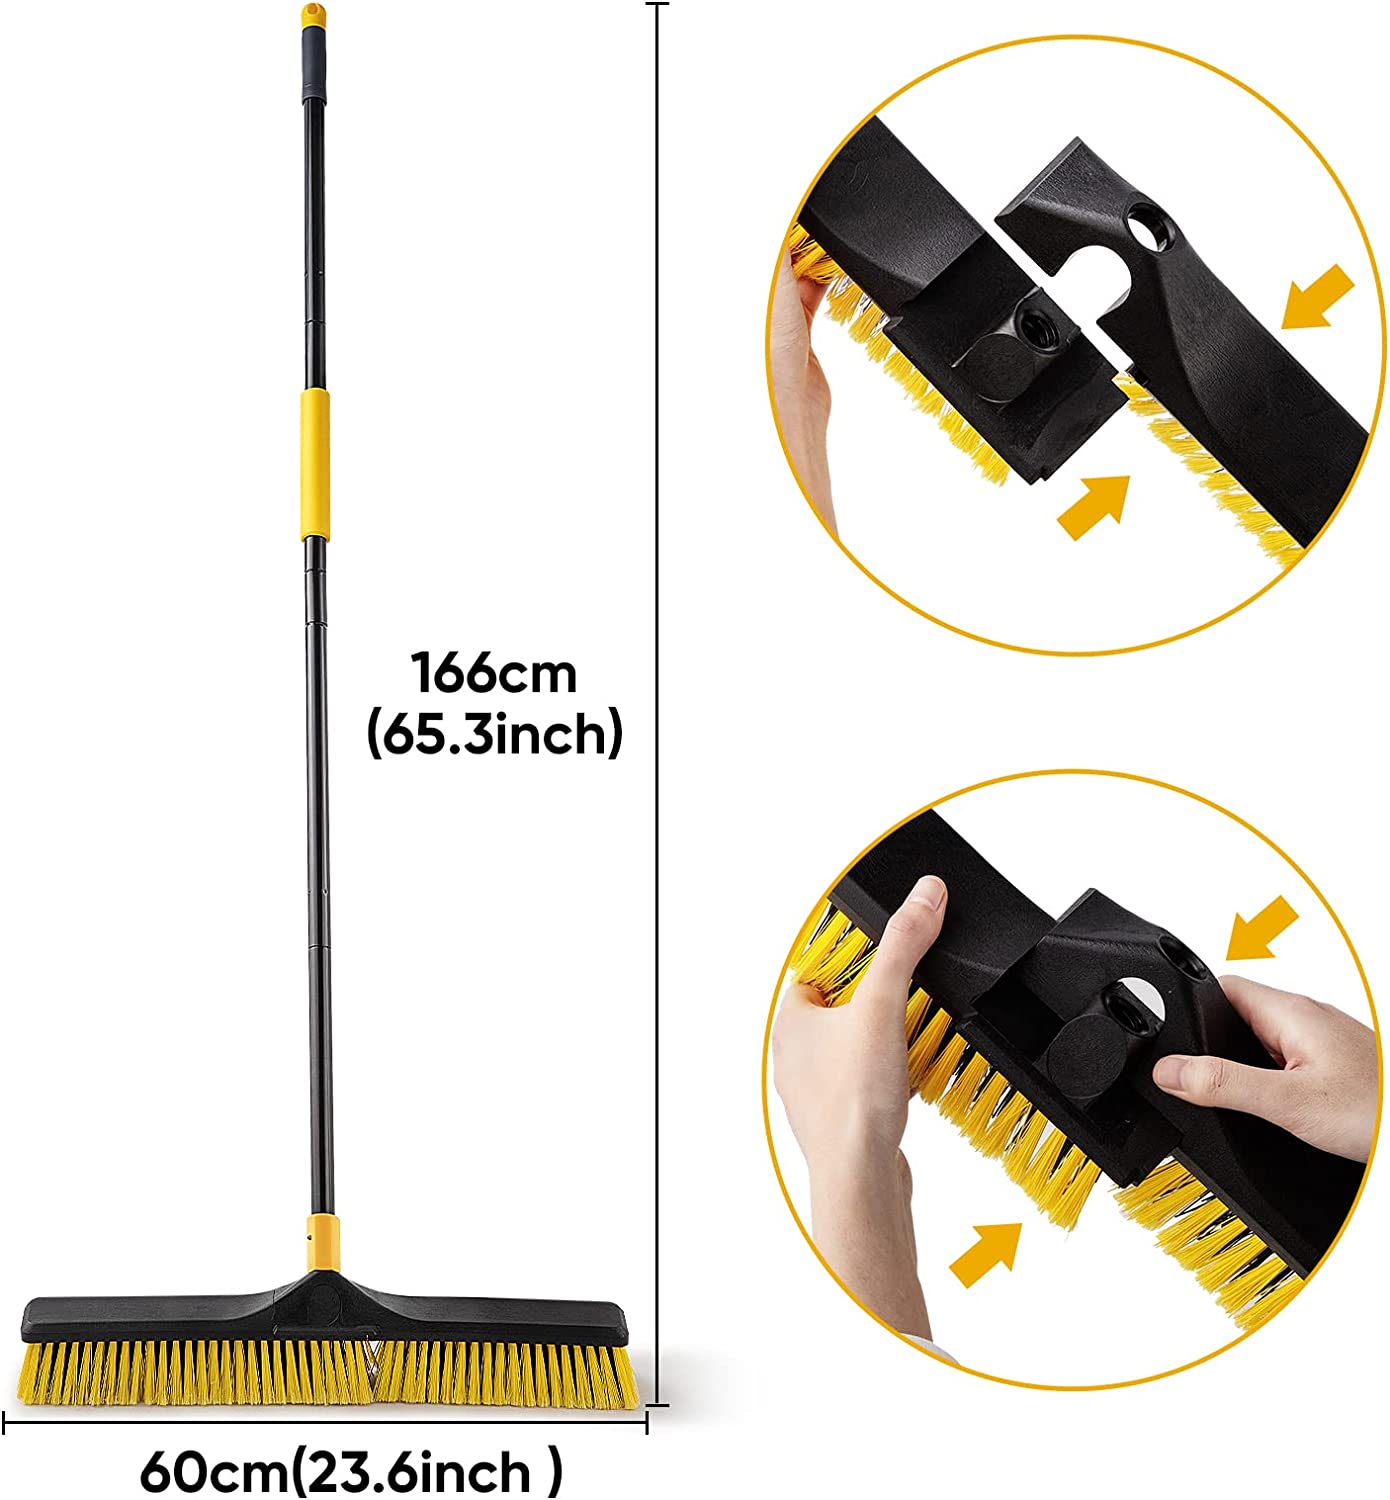 Yocada Heavy Duty Broom and Dustpan Set Commercial Outdoor Indoor 2+1 Perfect for Courtyard Garage Lobby Mall Market Floor Home Kitchen Room Office